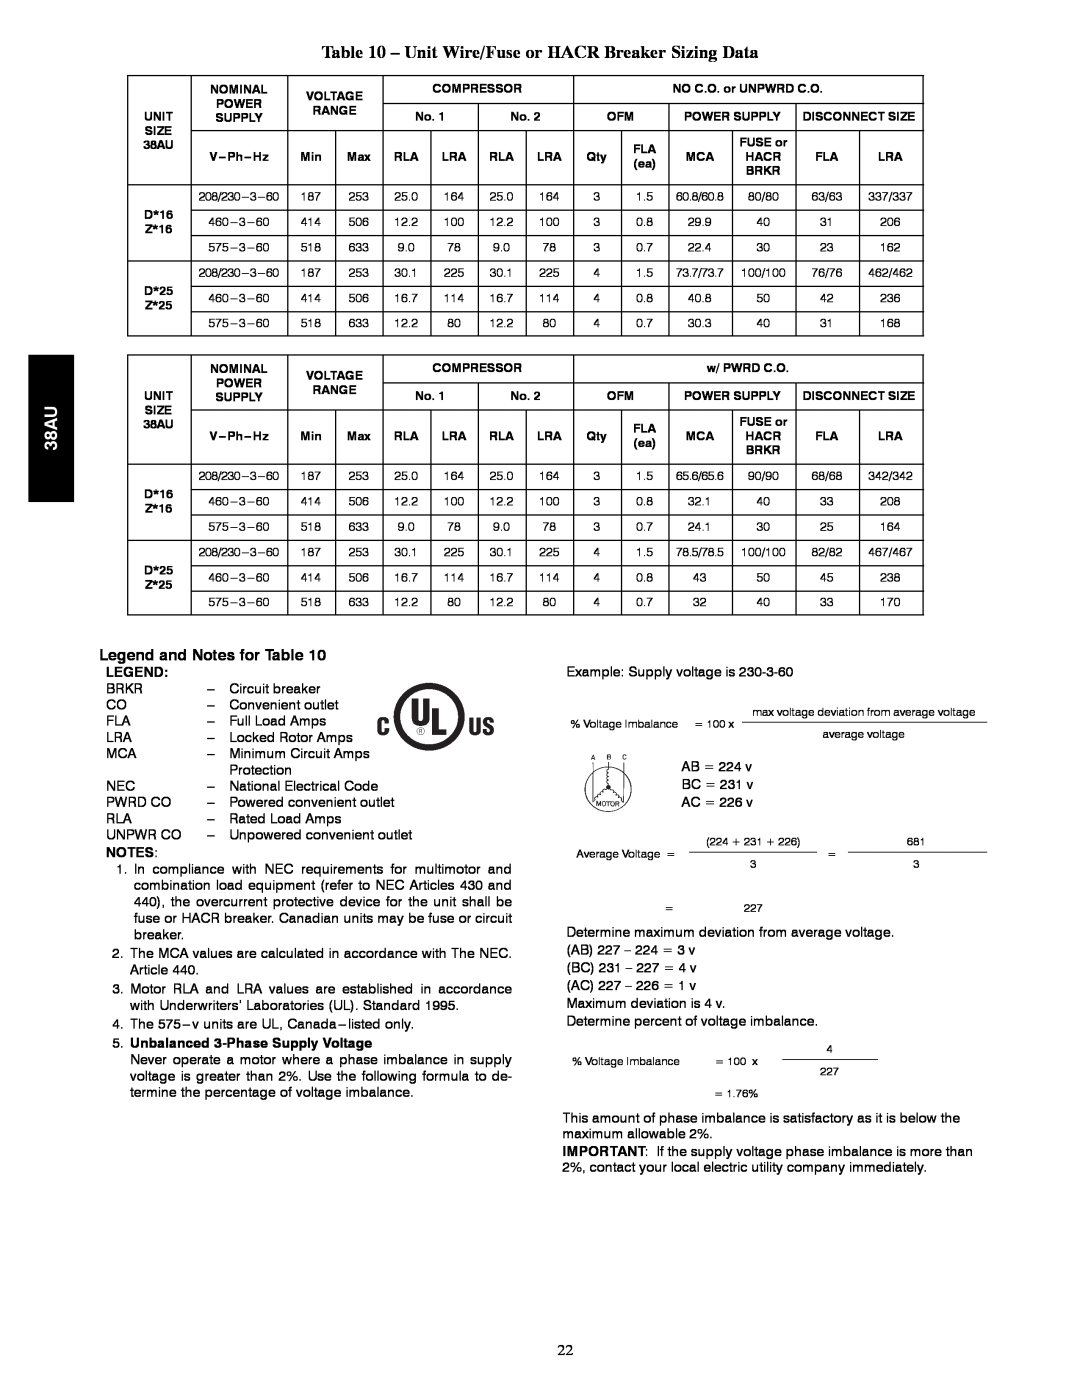 Carrier 38AU appendix Legend and Notes for Table, Unbalanced 3-PhaseSupply Voltage 